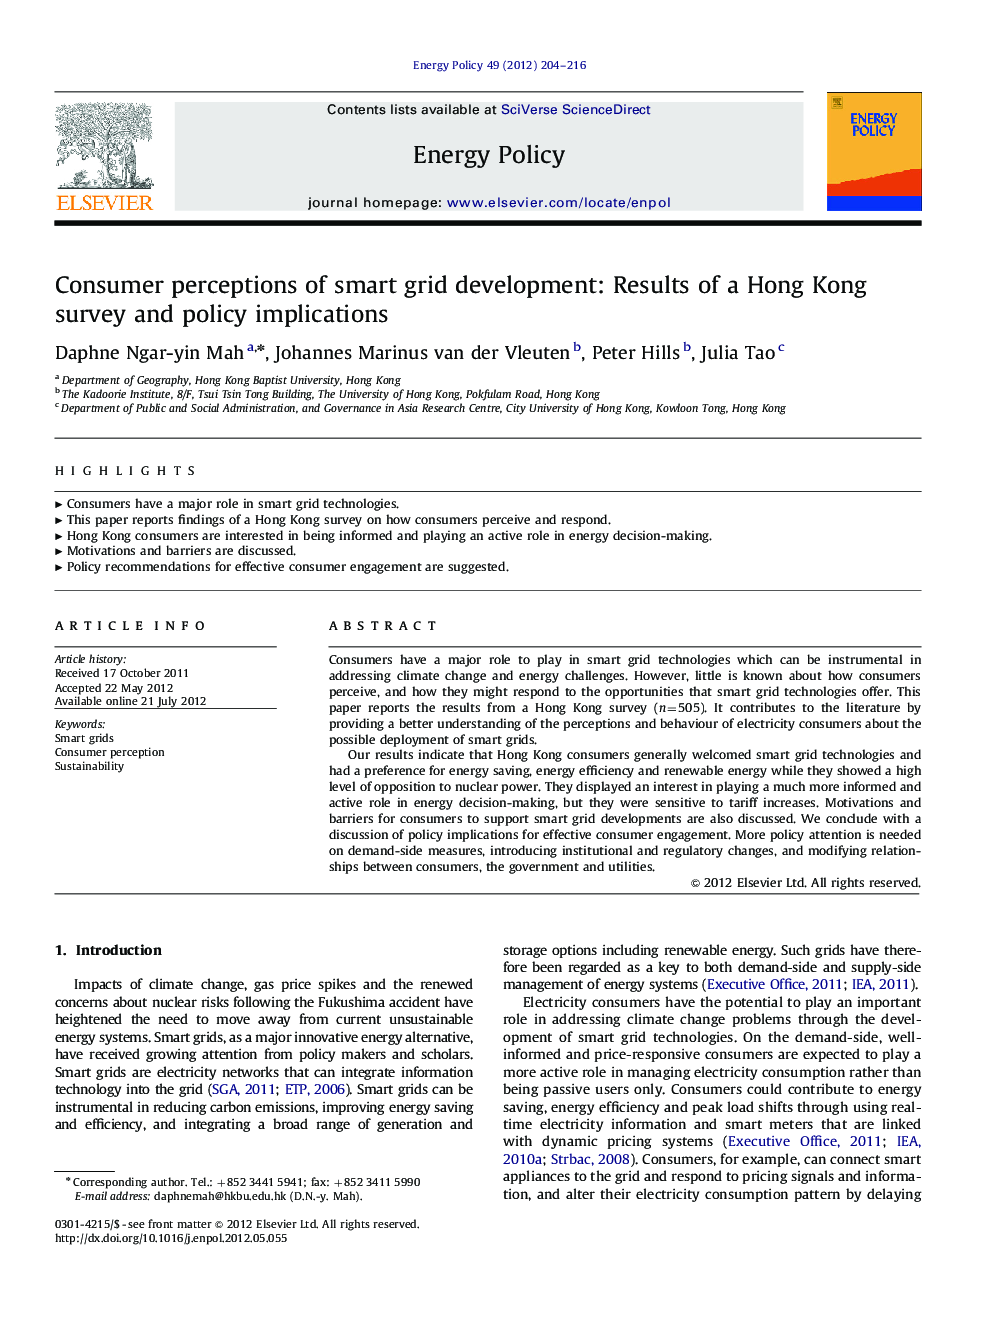 Consumer perceptions of smart grid development: Results of a Hong Kong survey and policy implications